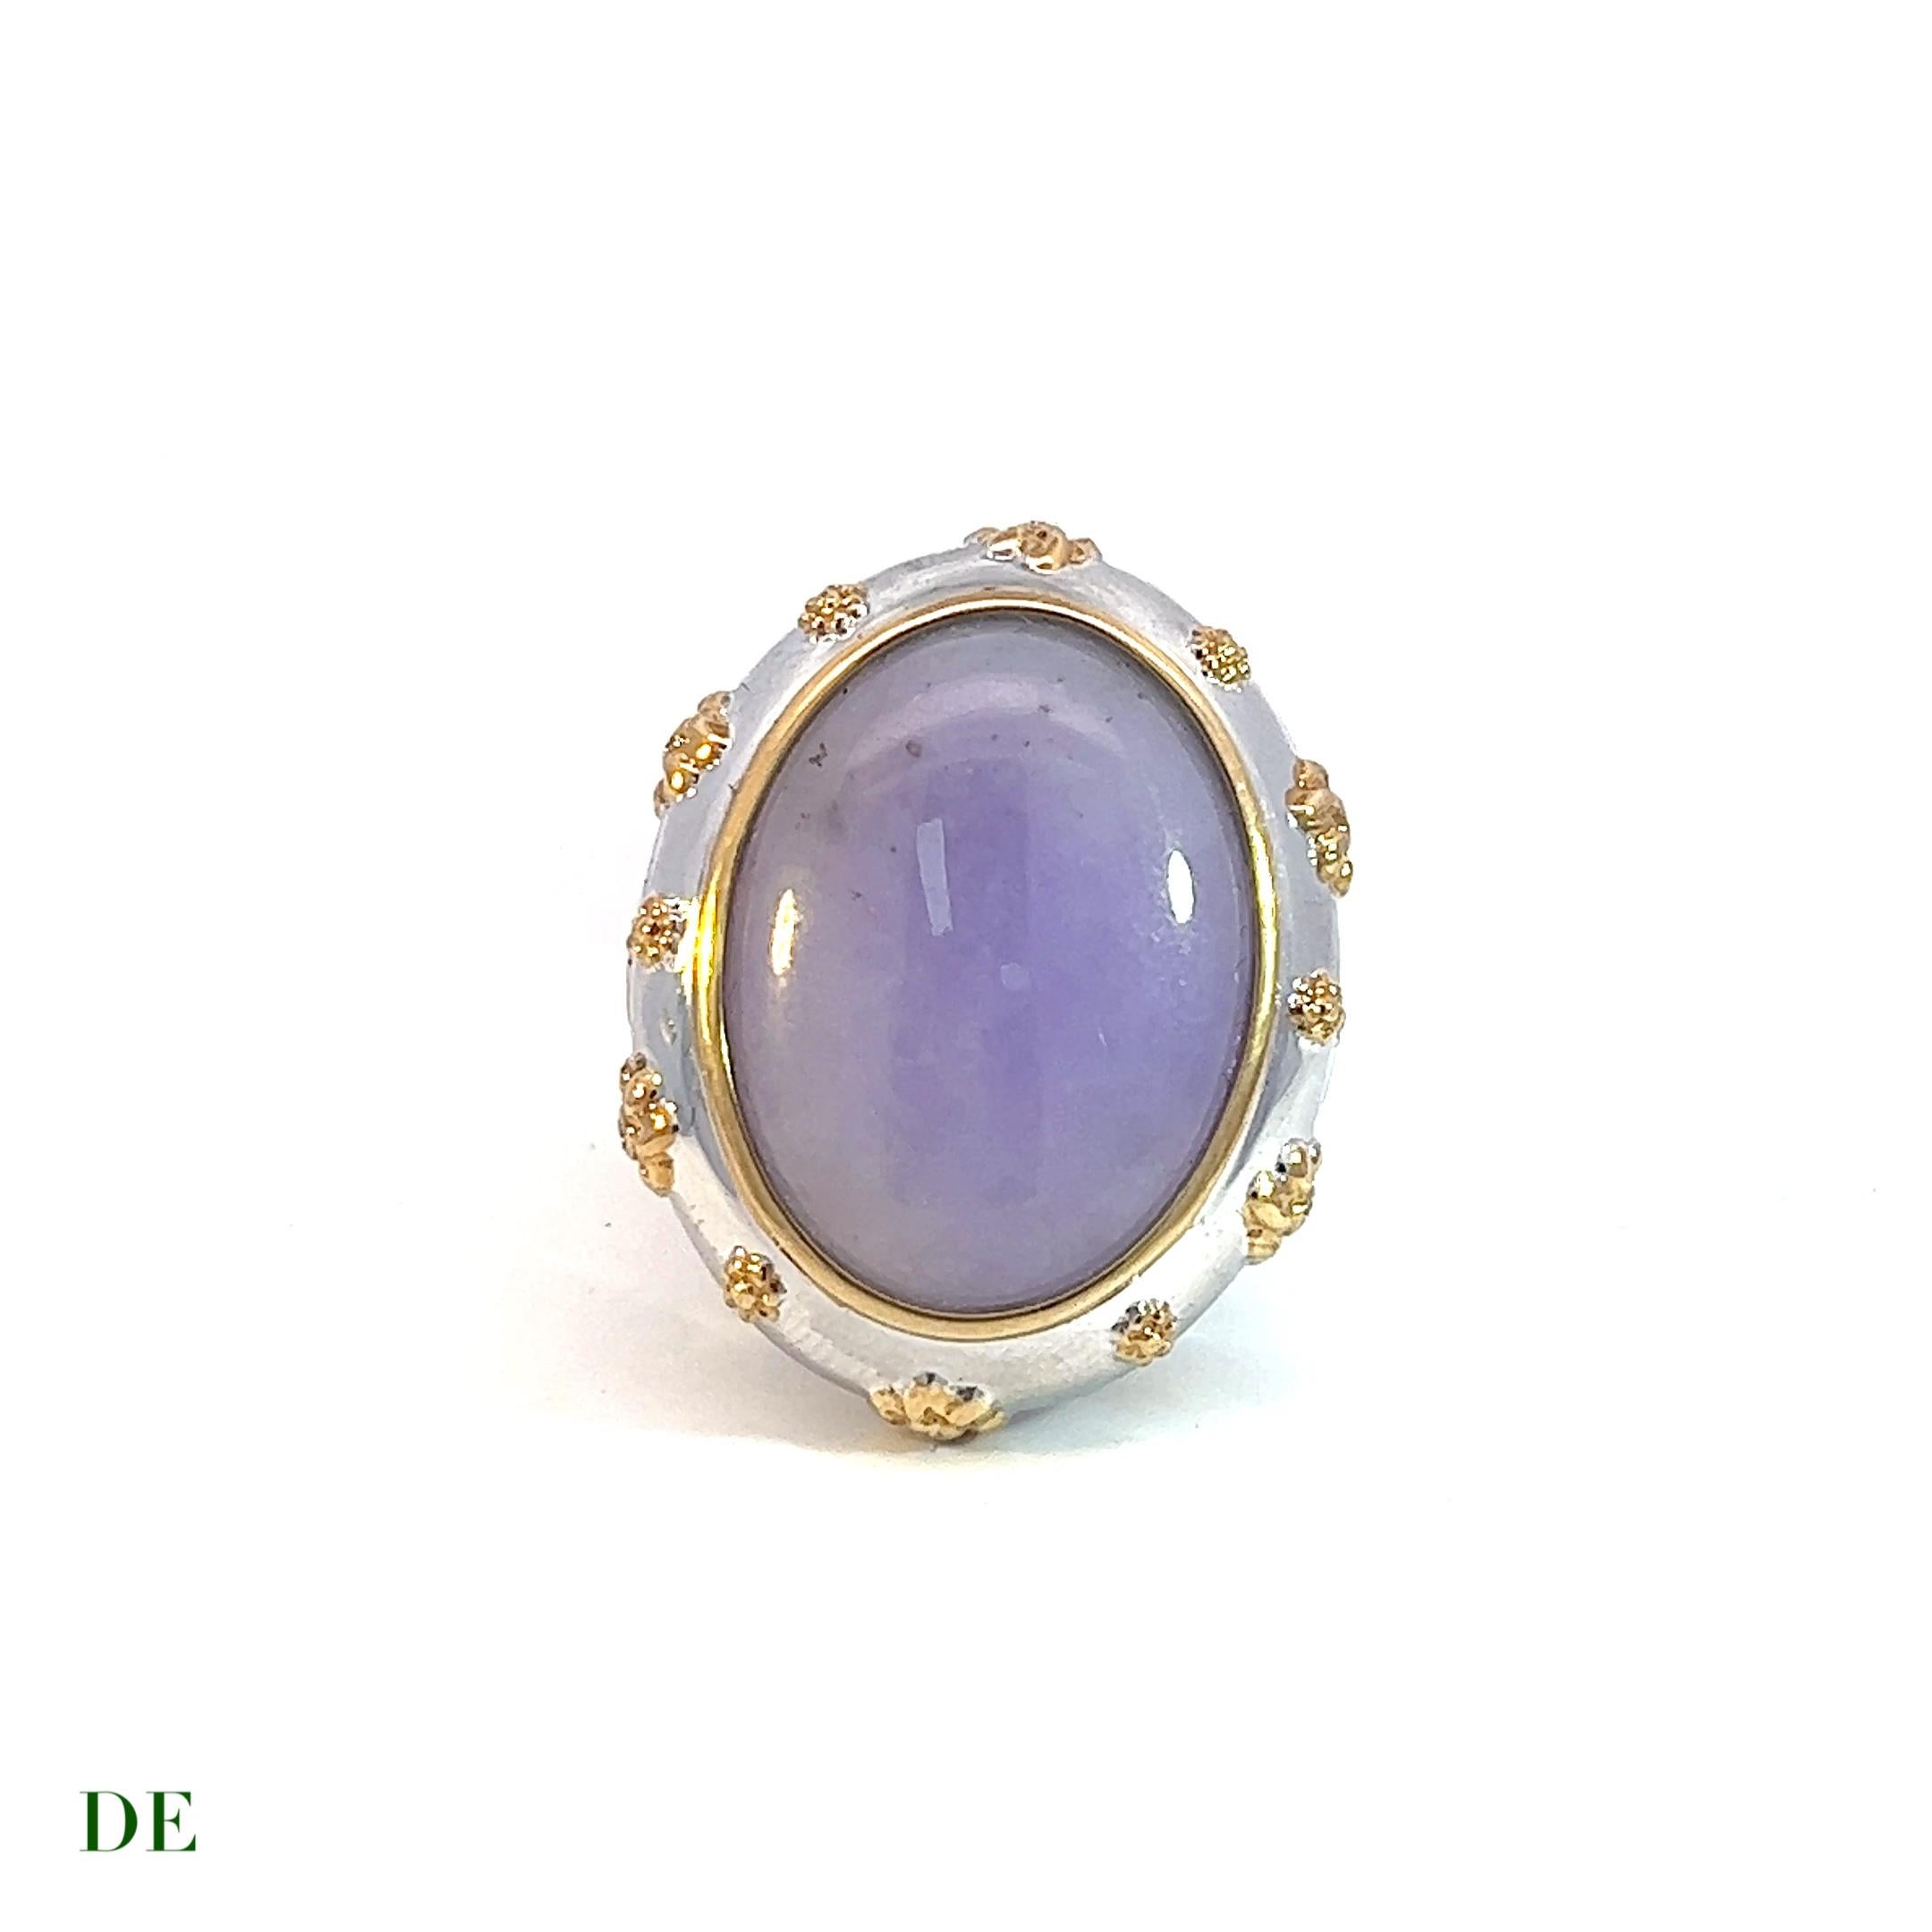 14k Neoclassic 20.37 Crt Jade with .081 ct Diamond Statement Cocktail Ring

Introducing the 14k Neoclassic Jade and Diamond Statement Cocktail Ring, an extraordinary piece that showcases the captivating beauty of a 20.37 carat natural lavender jade